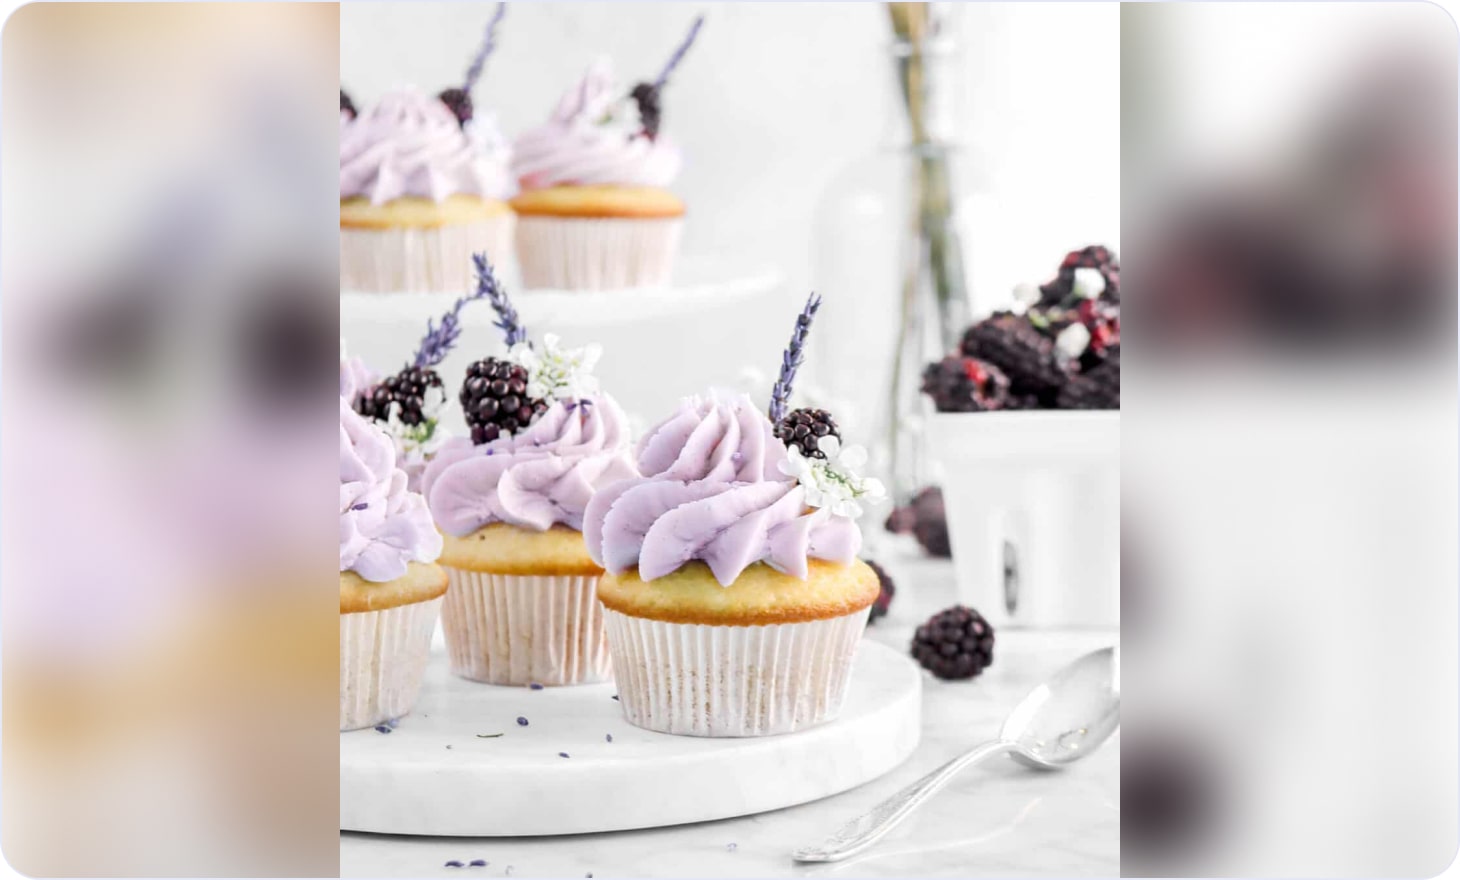 Cupcakes with lavender extract